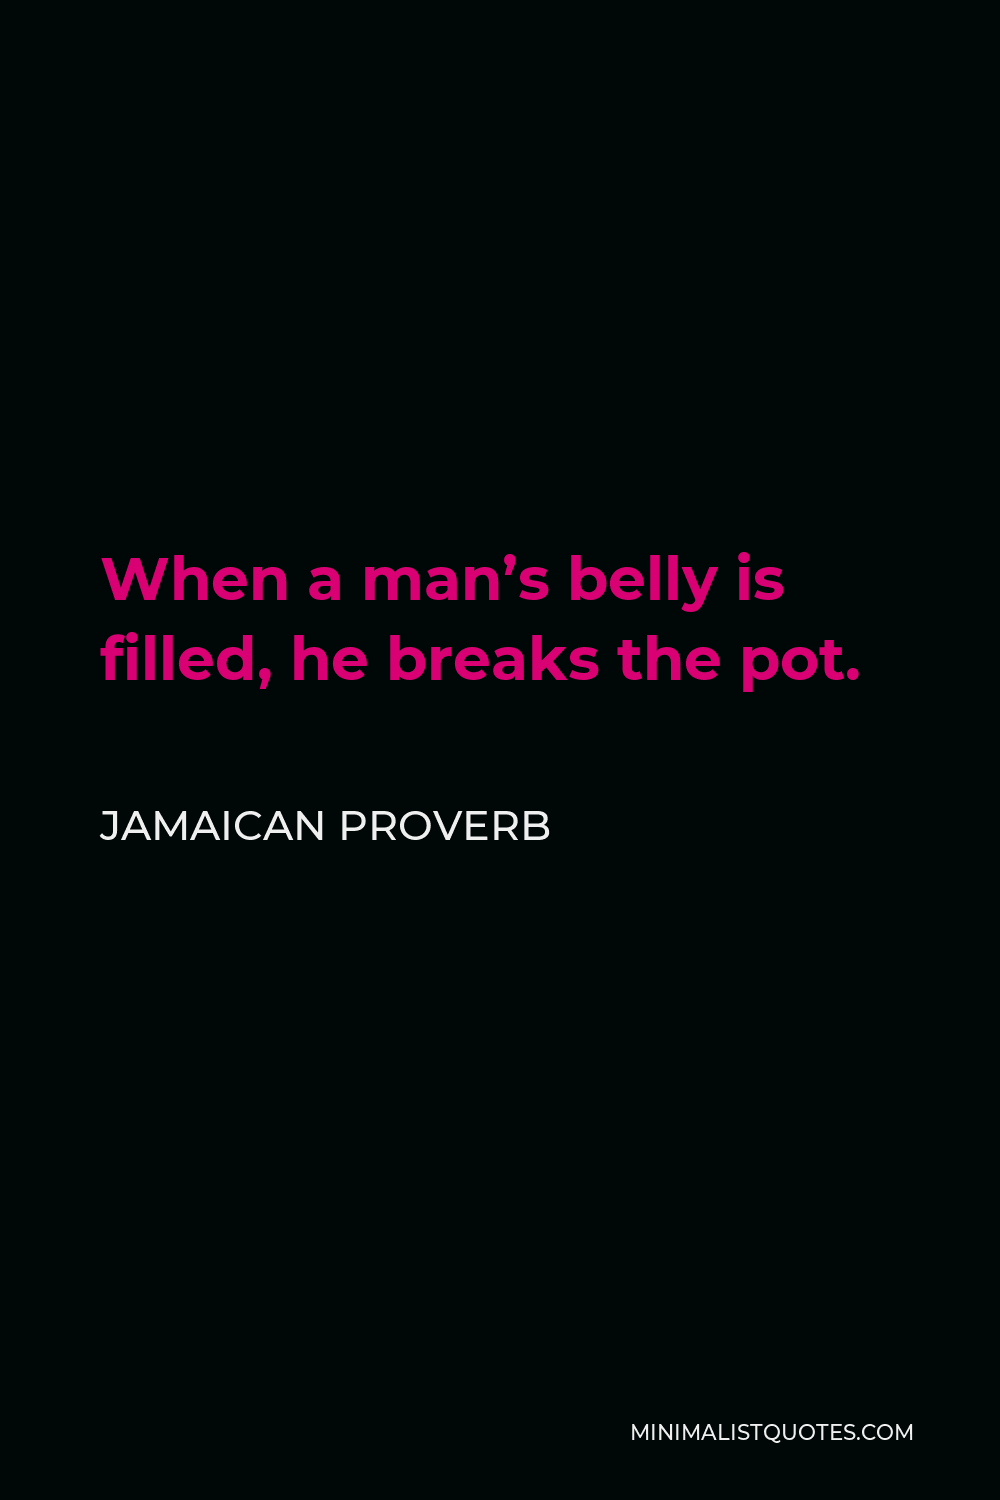 Jamaican Proverb Quote - When a man’s belly is filled, he breaks the pot.